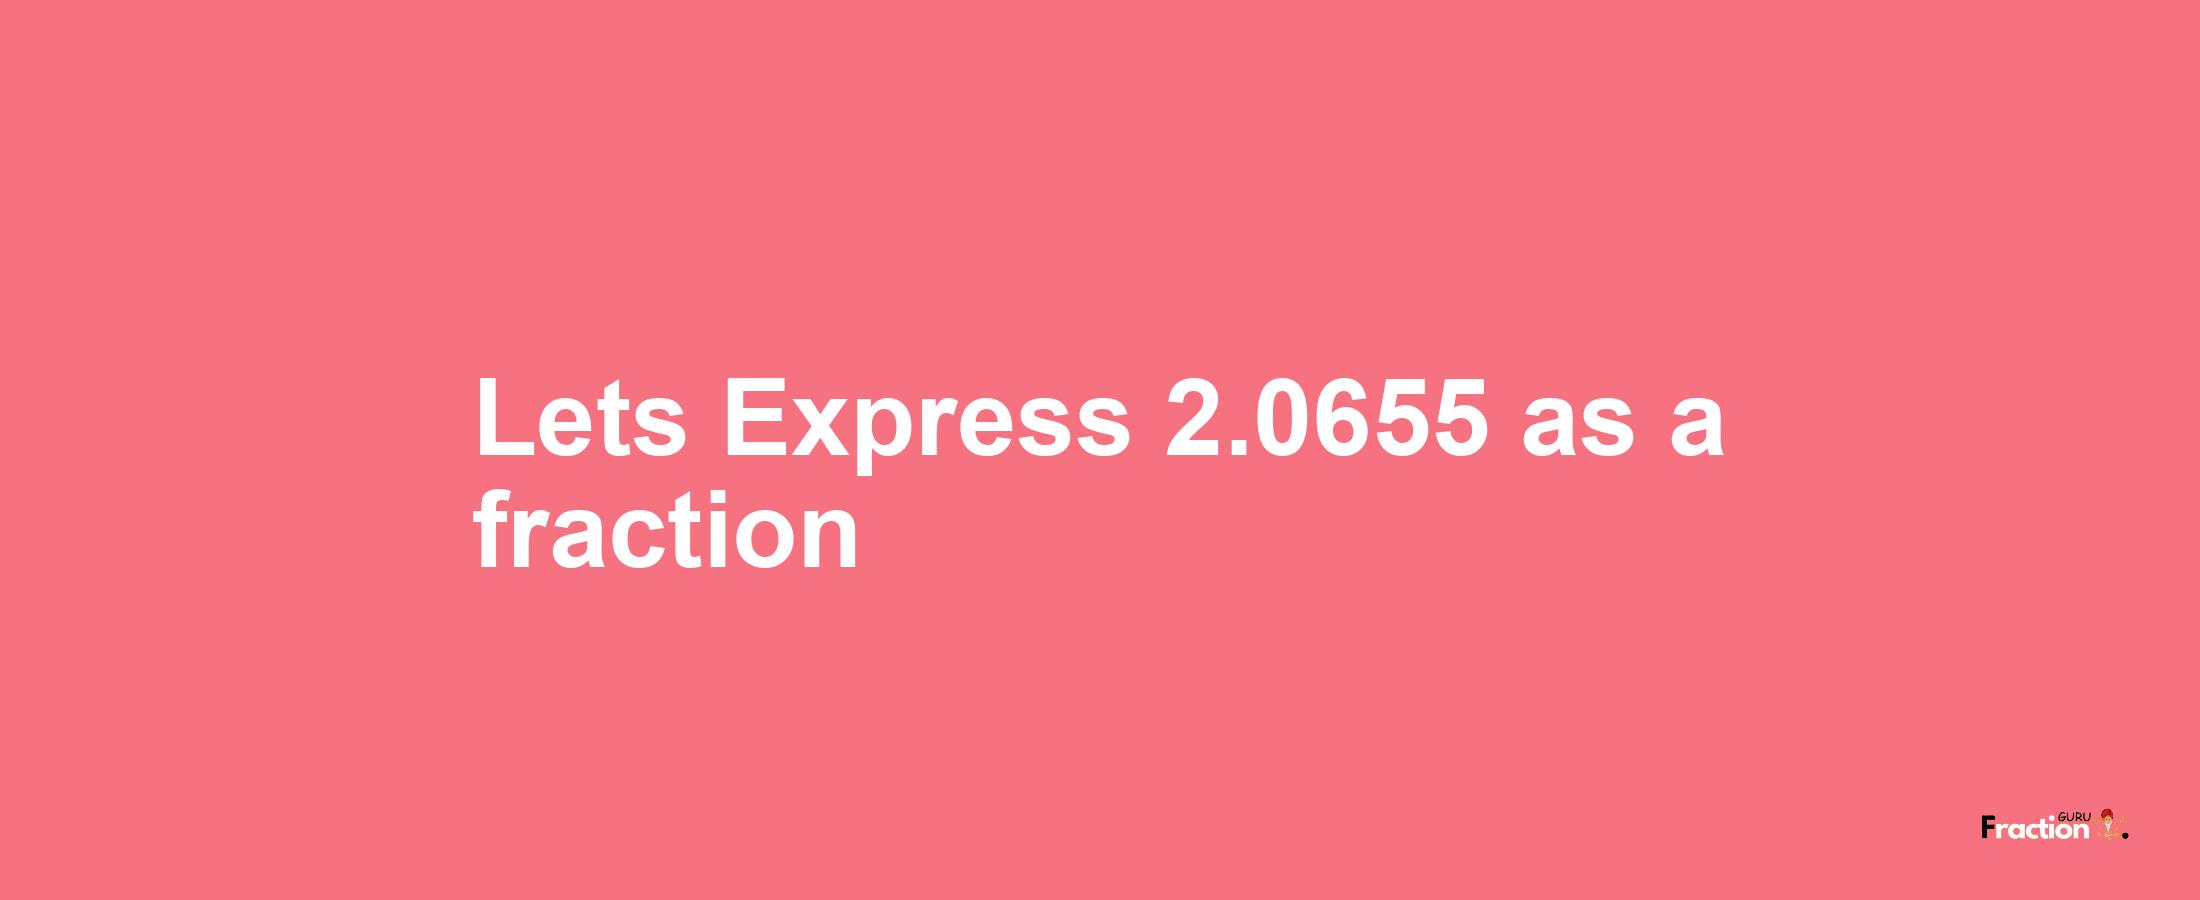 Lets Express 2.0655 as afraction